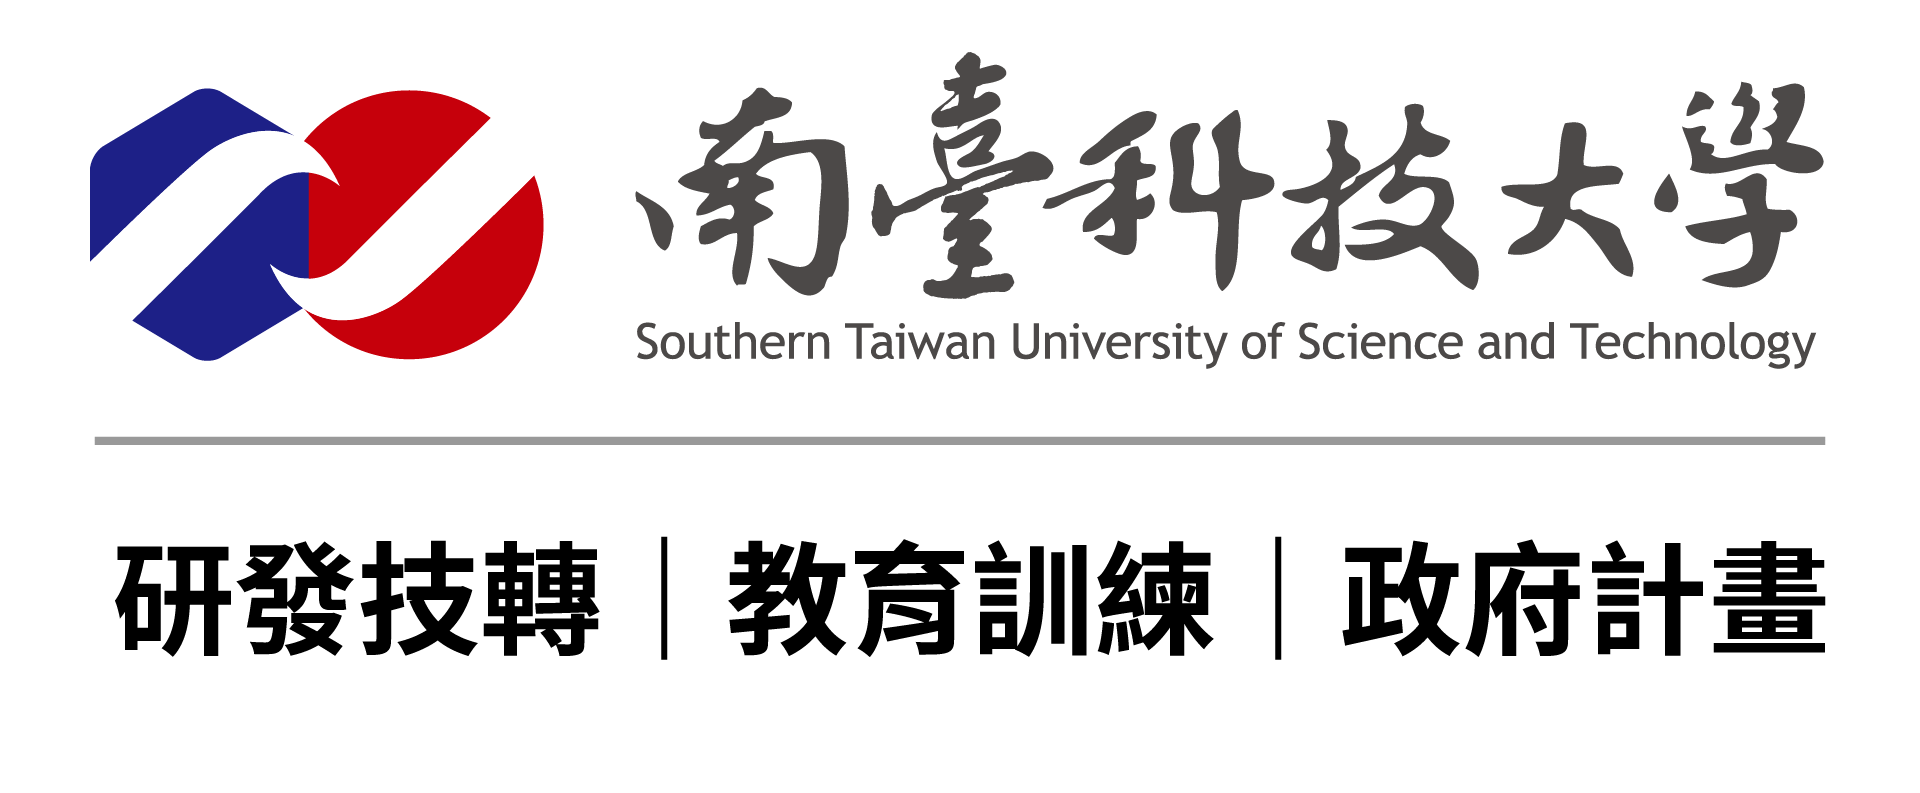 Southern Taiwan University of Science and Technology Taiwan